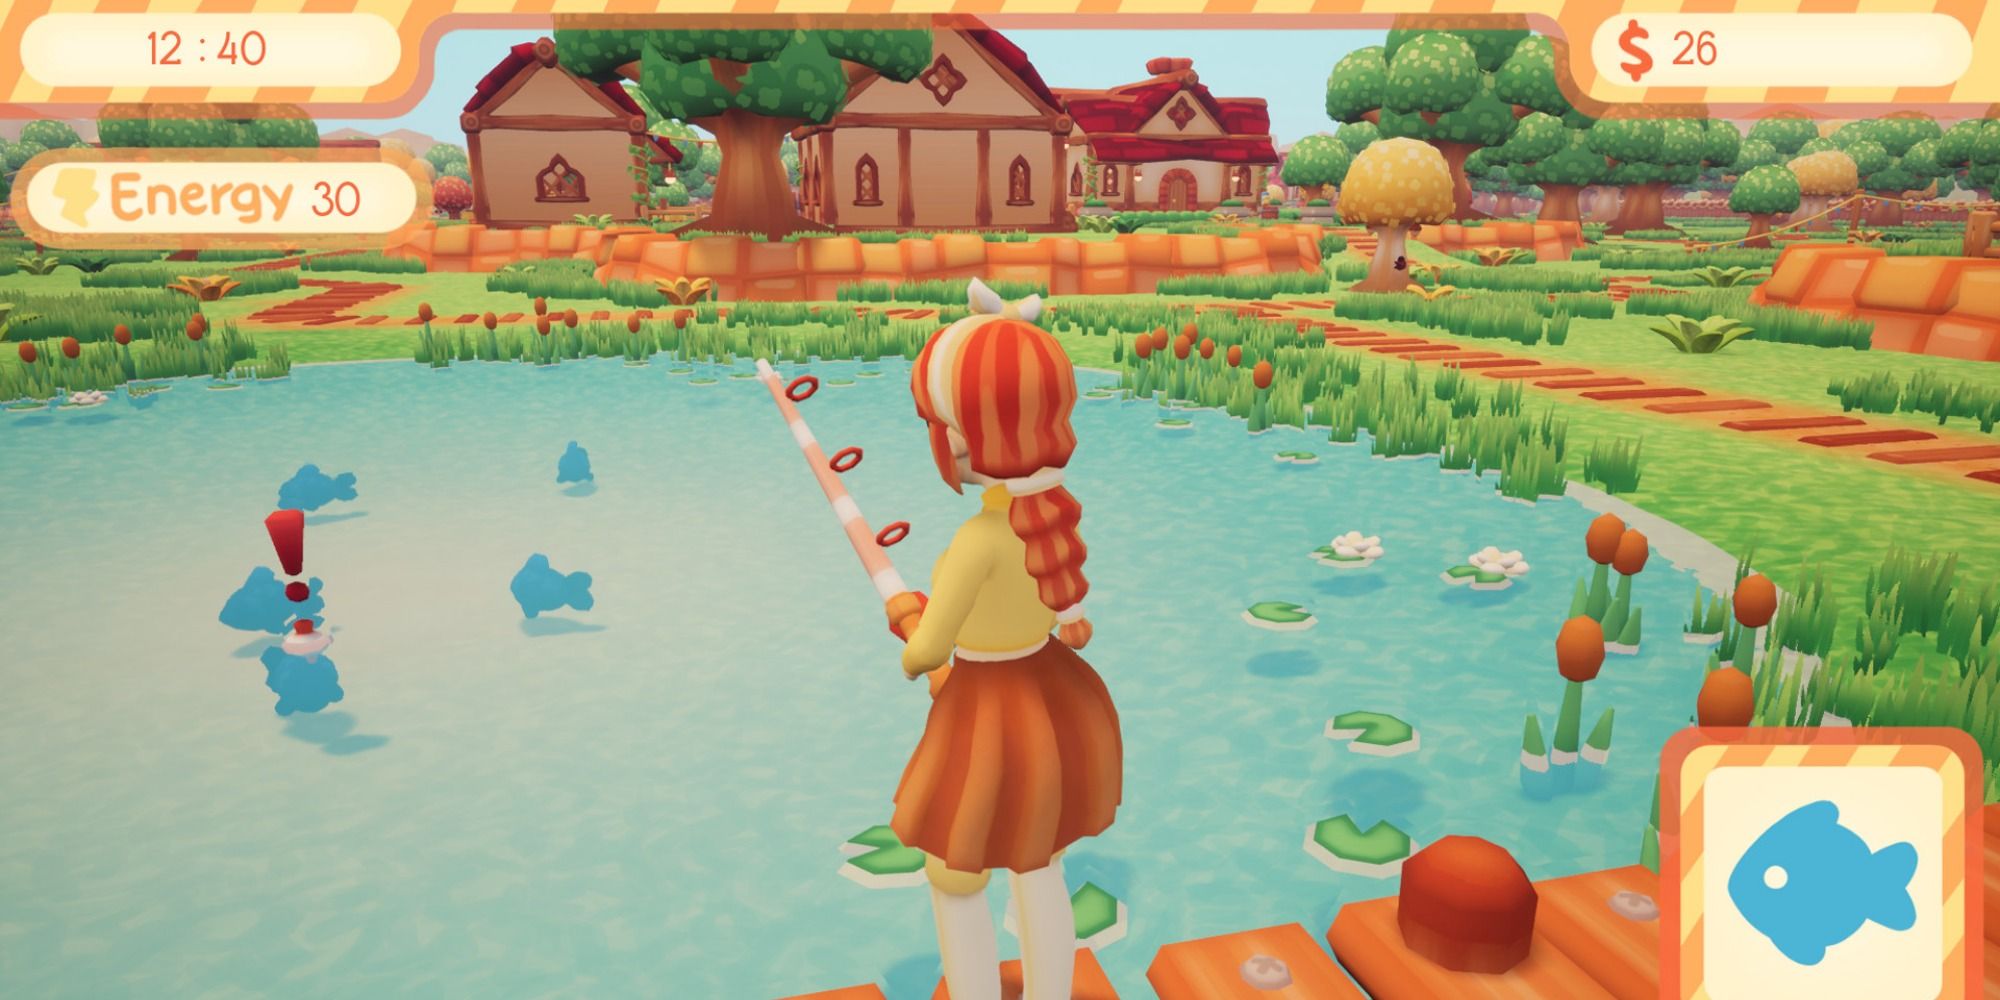 A ginger-haired girl fishes off a dock in a lush countryside